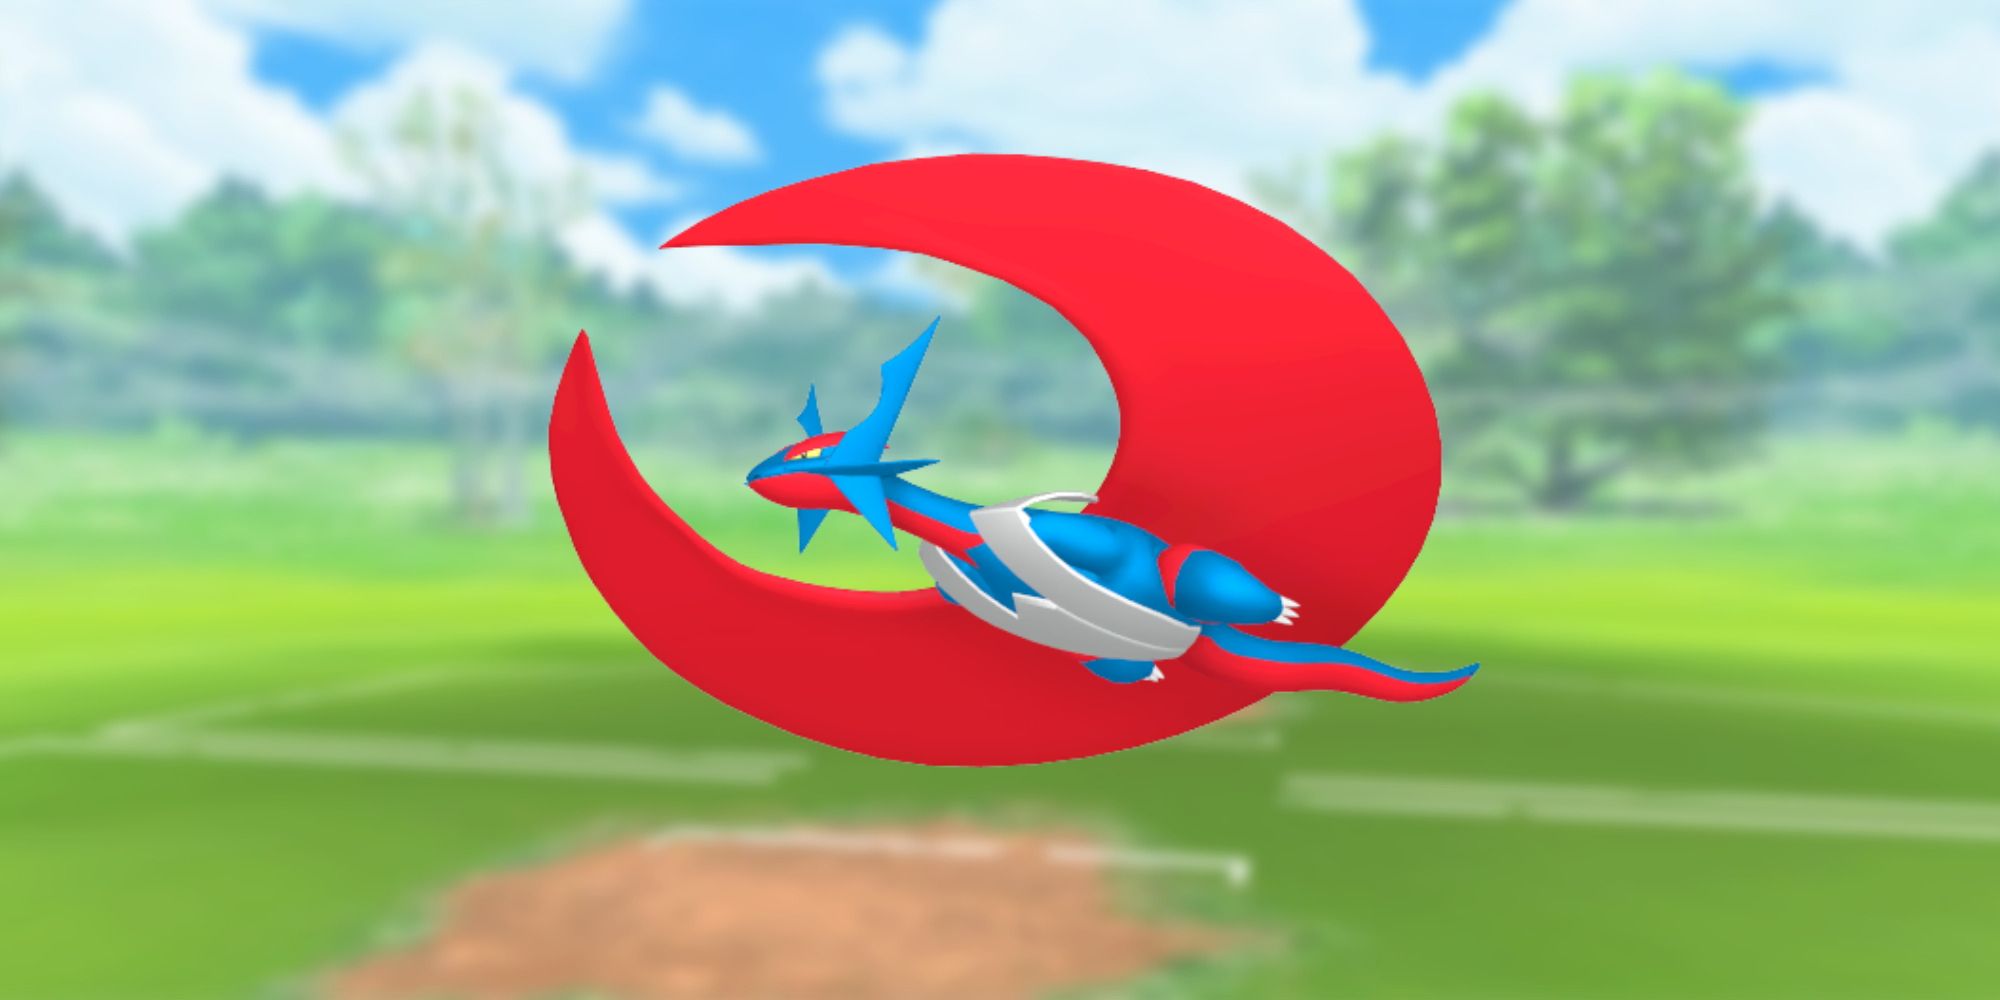 Mega Salamence from Pokemon with the Pokemon Go battlefield as the background